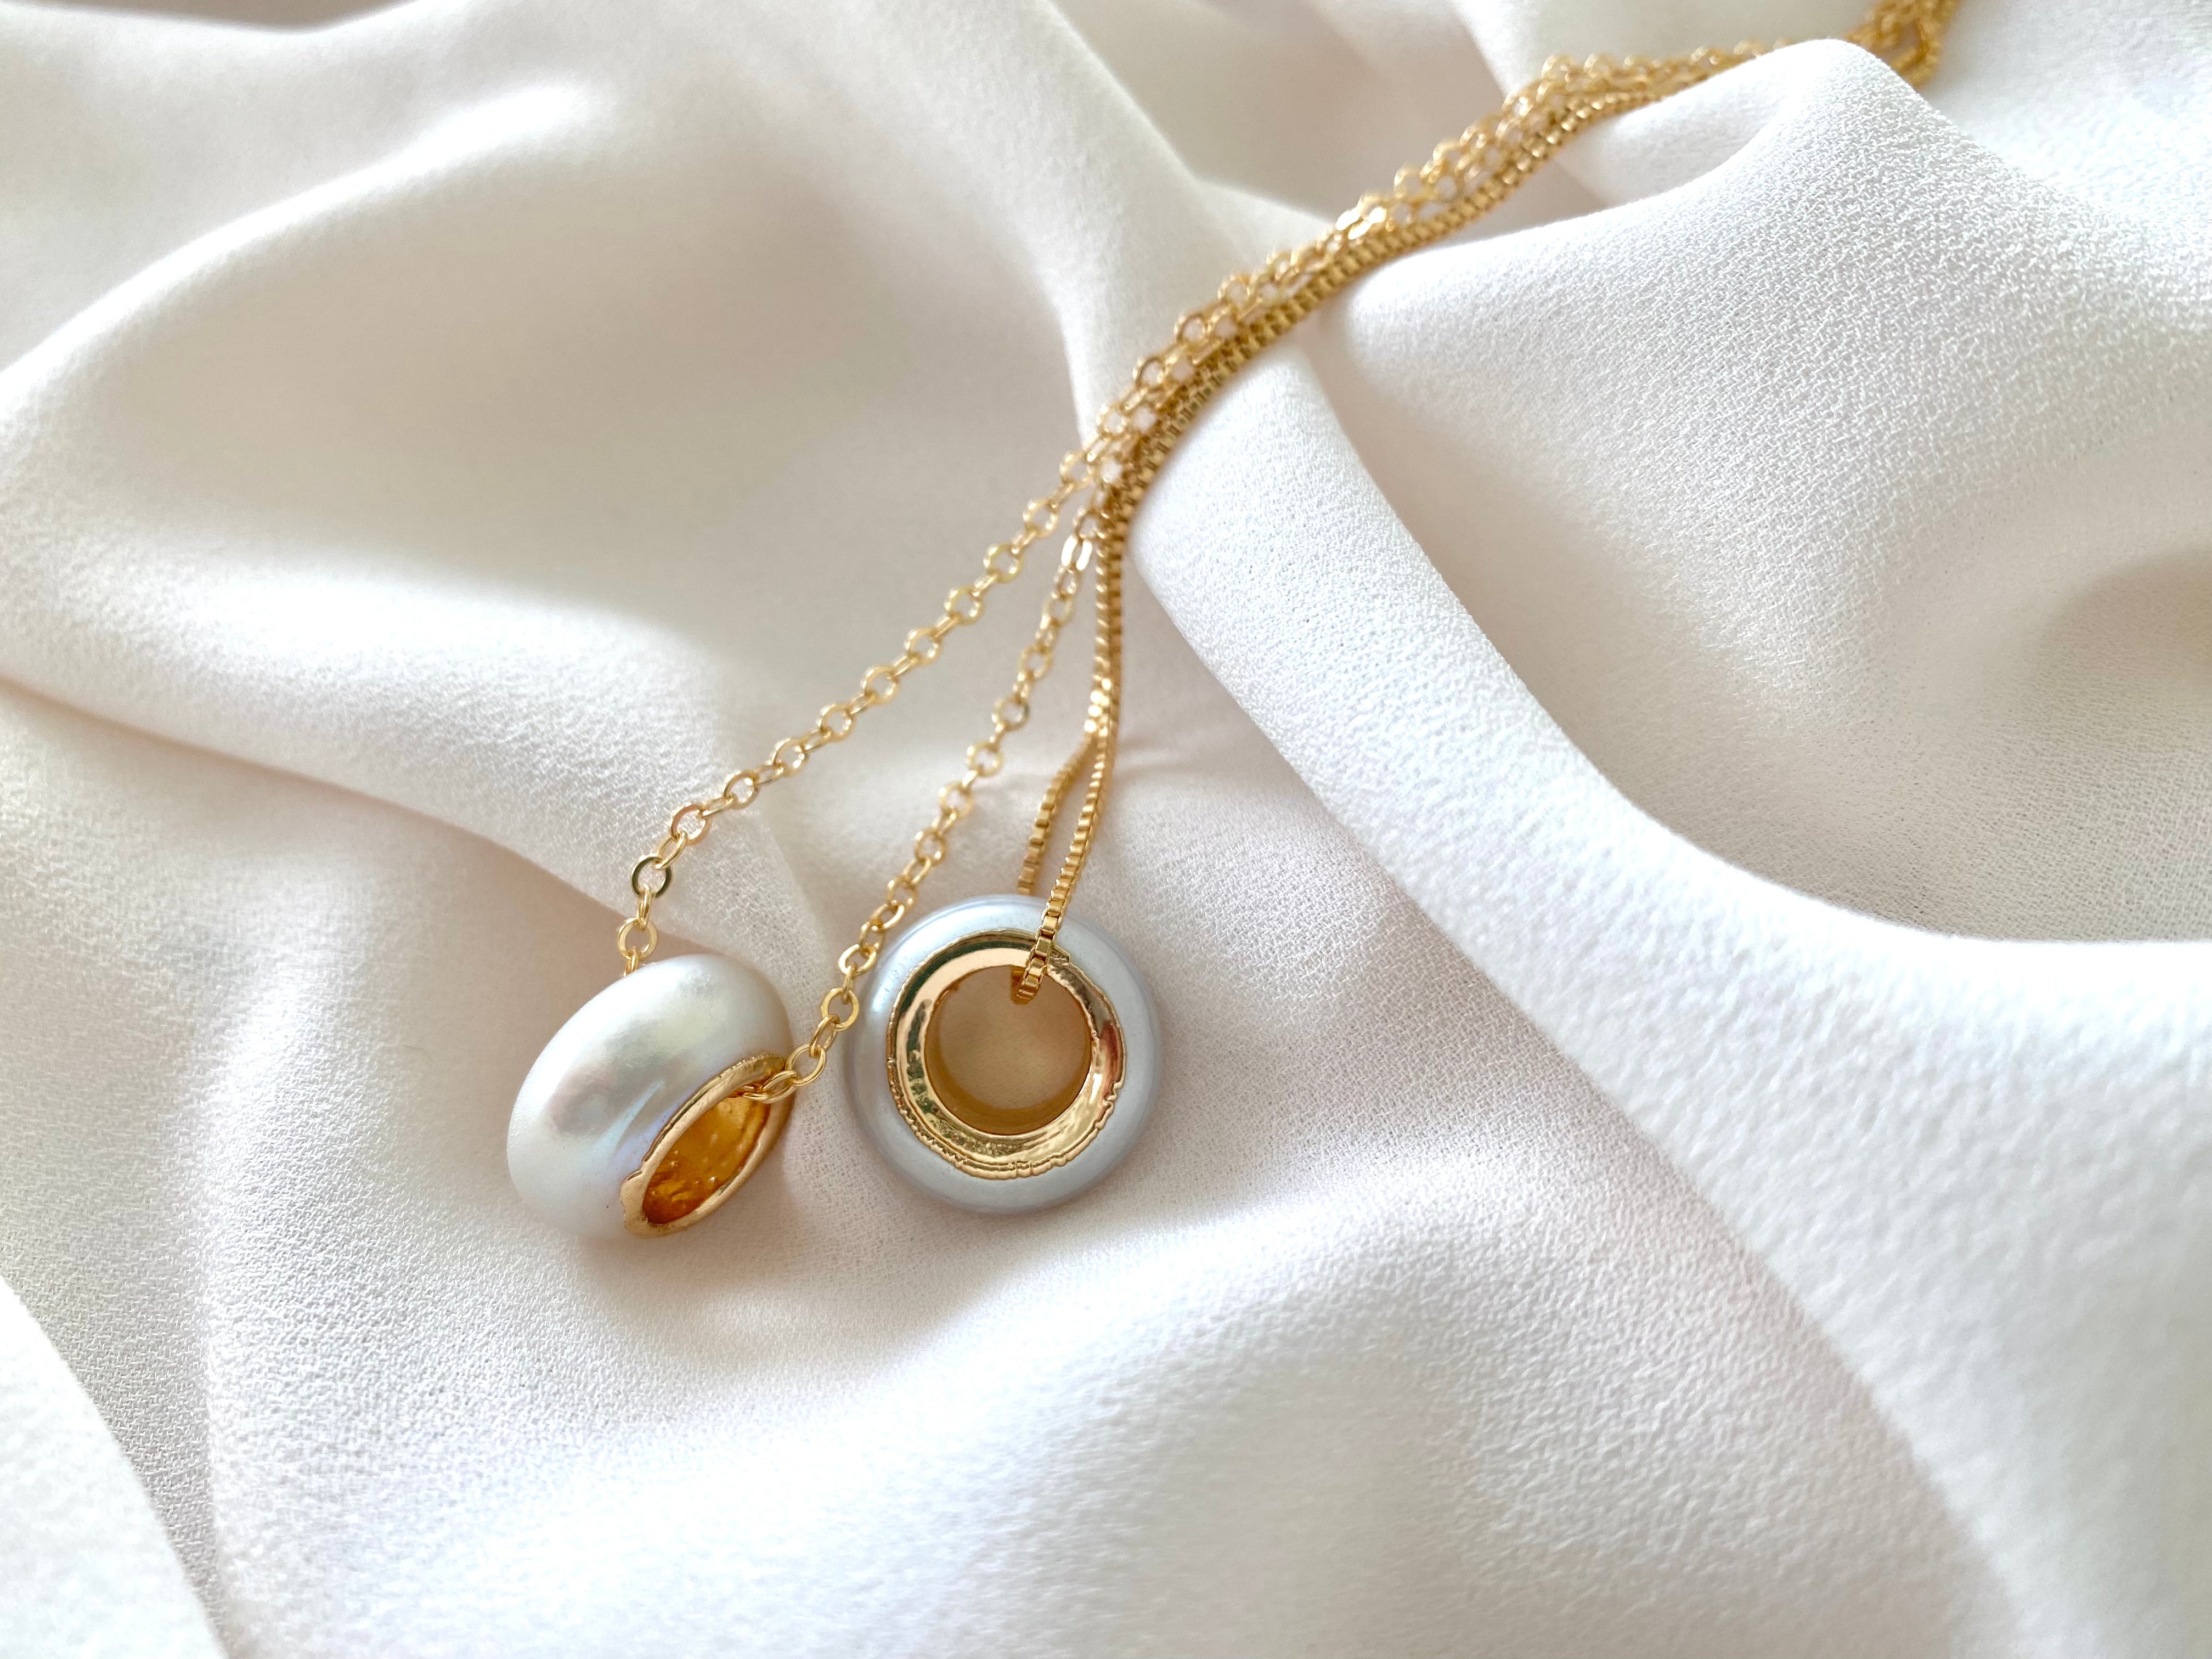 Modern Pearl Necklace - June Birthstone - Rondell Pendant Pearl Necklace